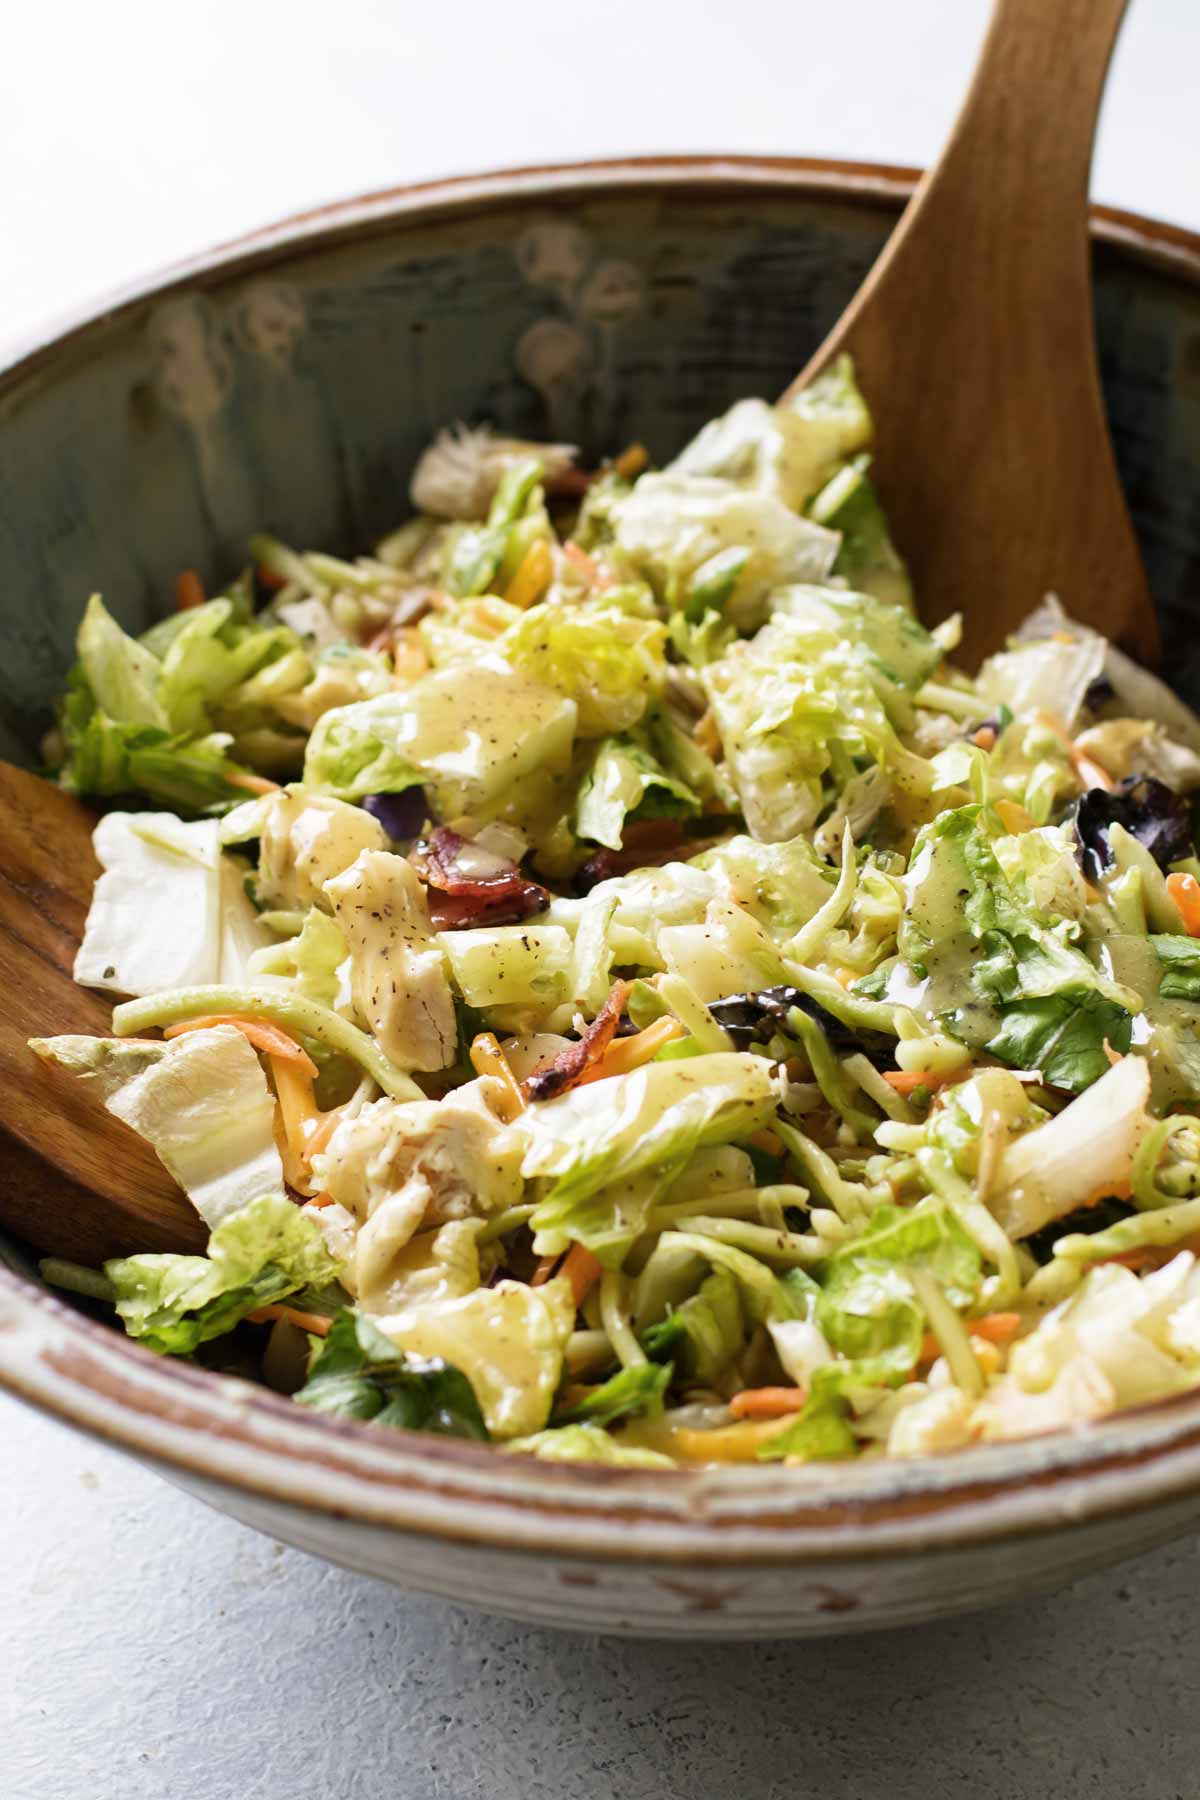 photo of a bowl of salad